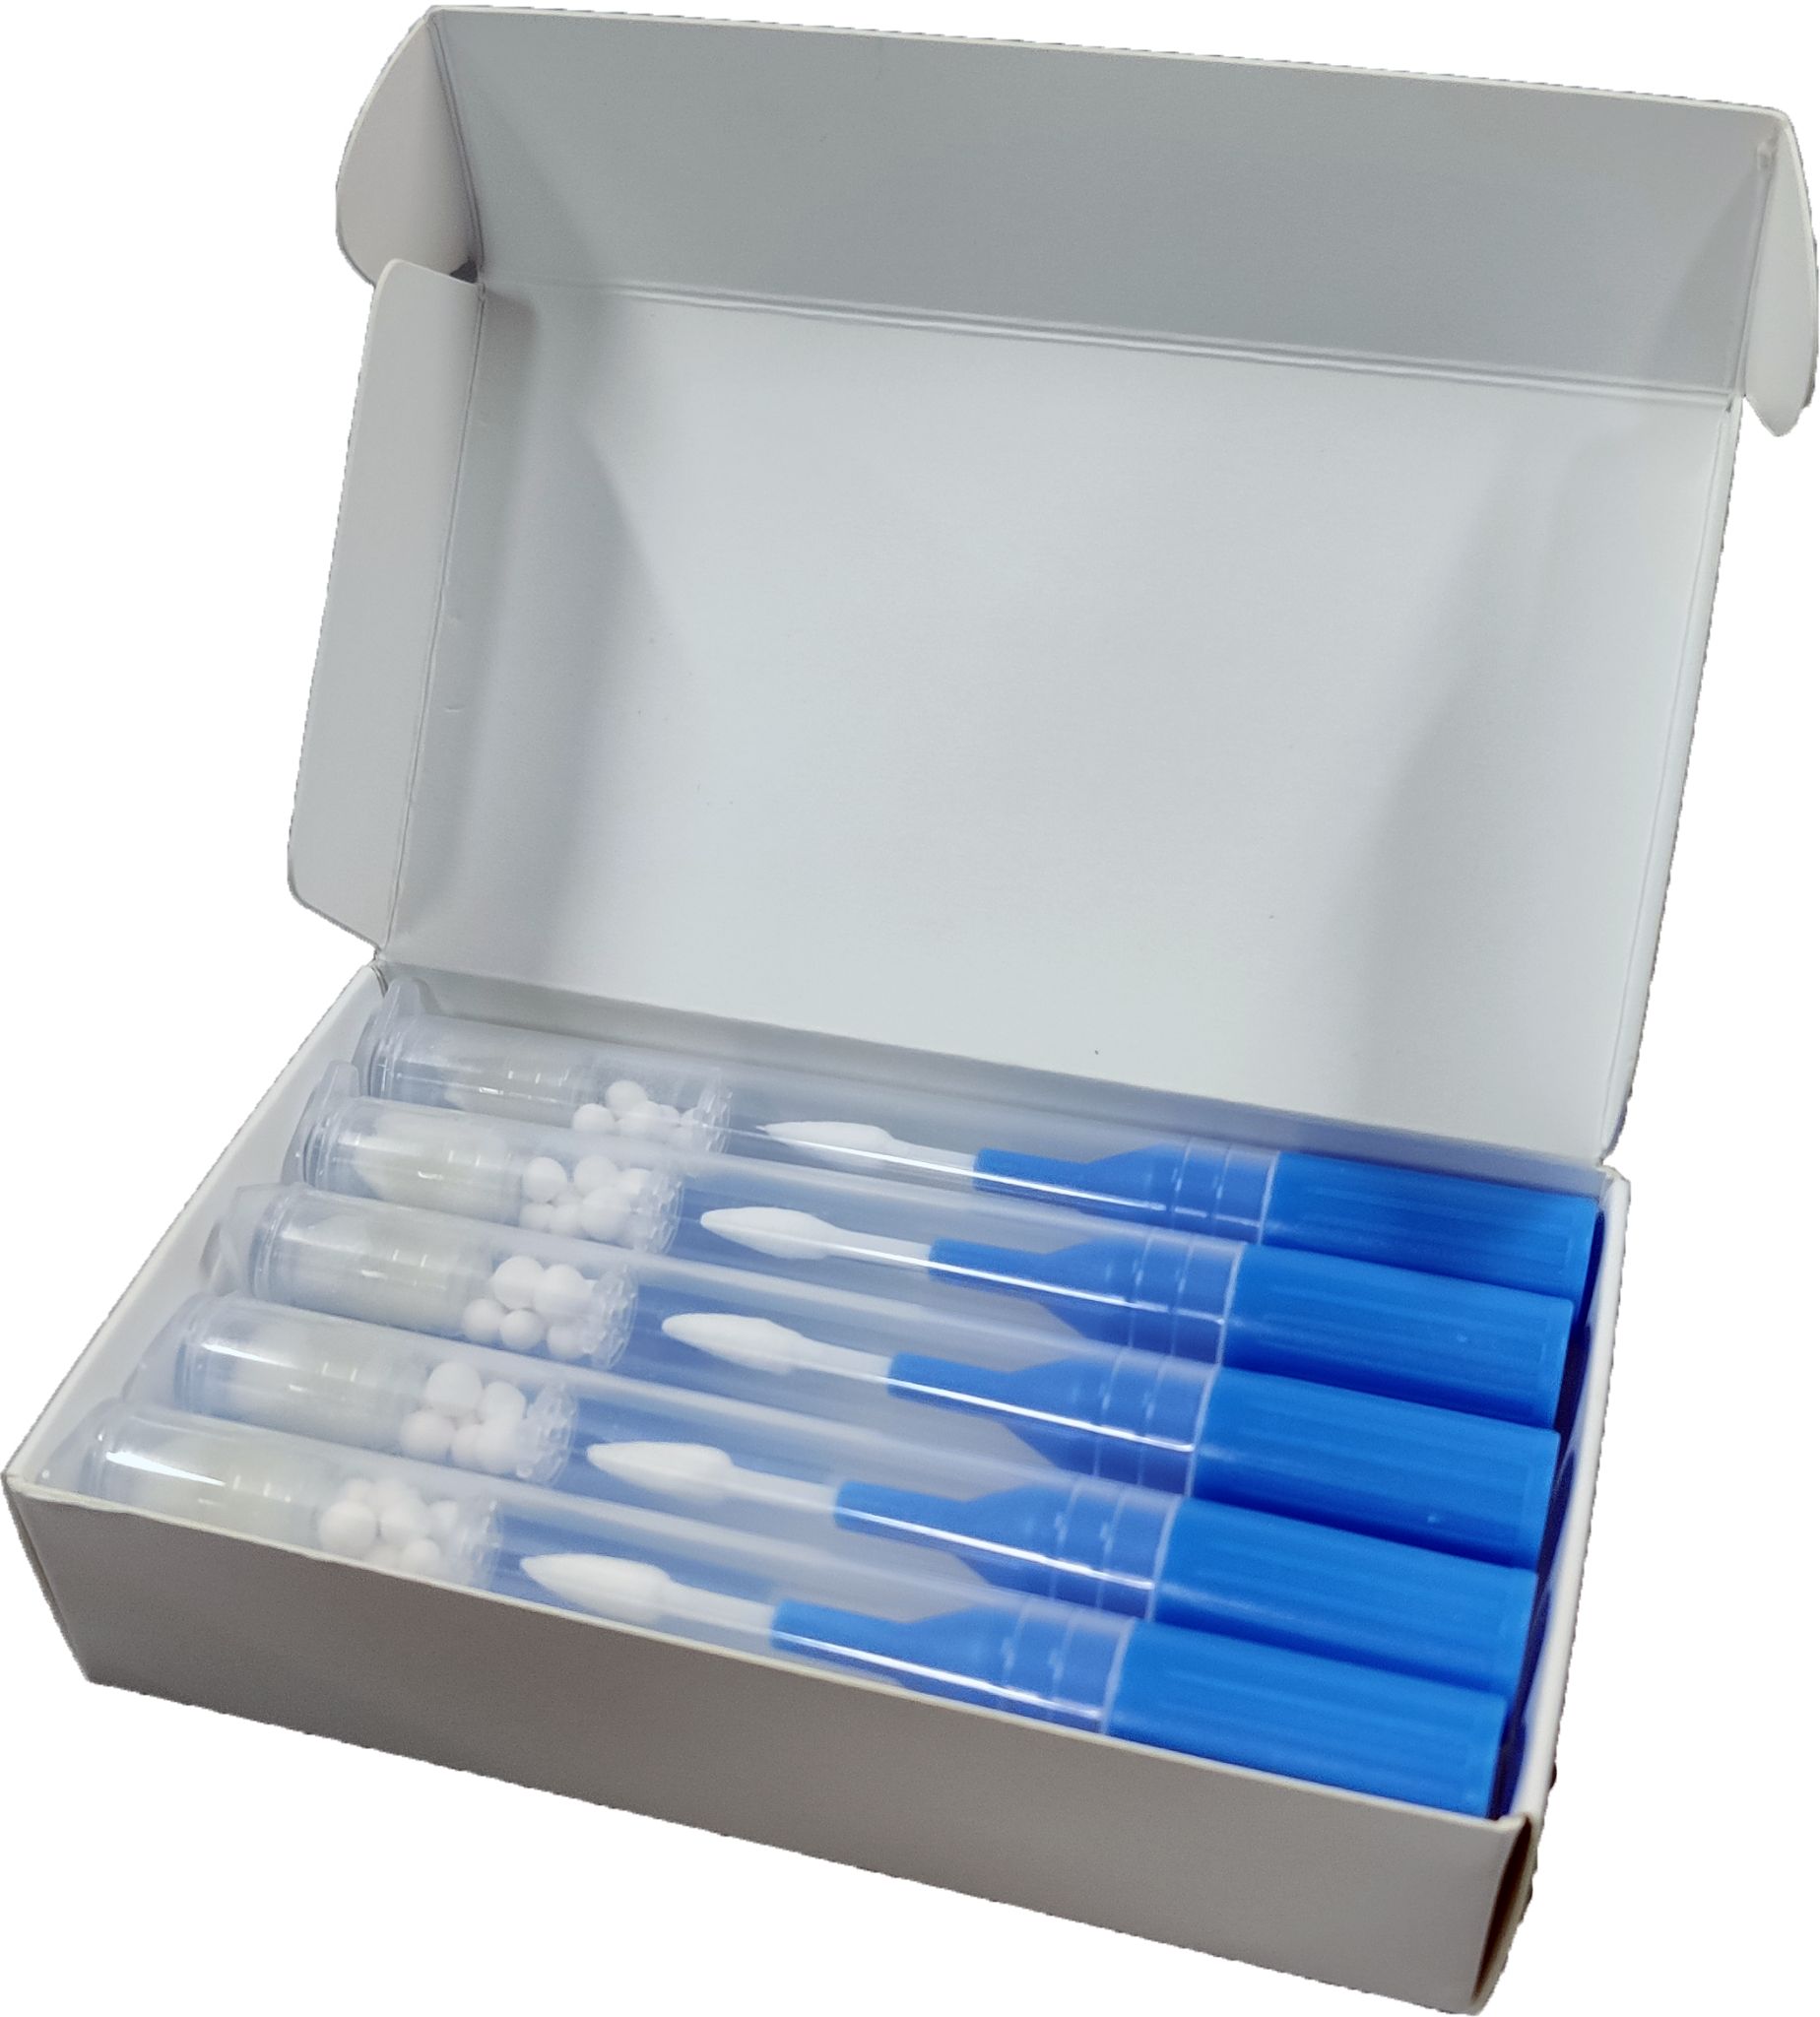 Mantacc 97000S Single-swab Forensic Sample Collection Kit